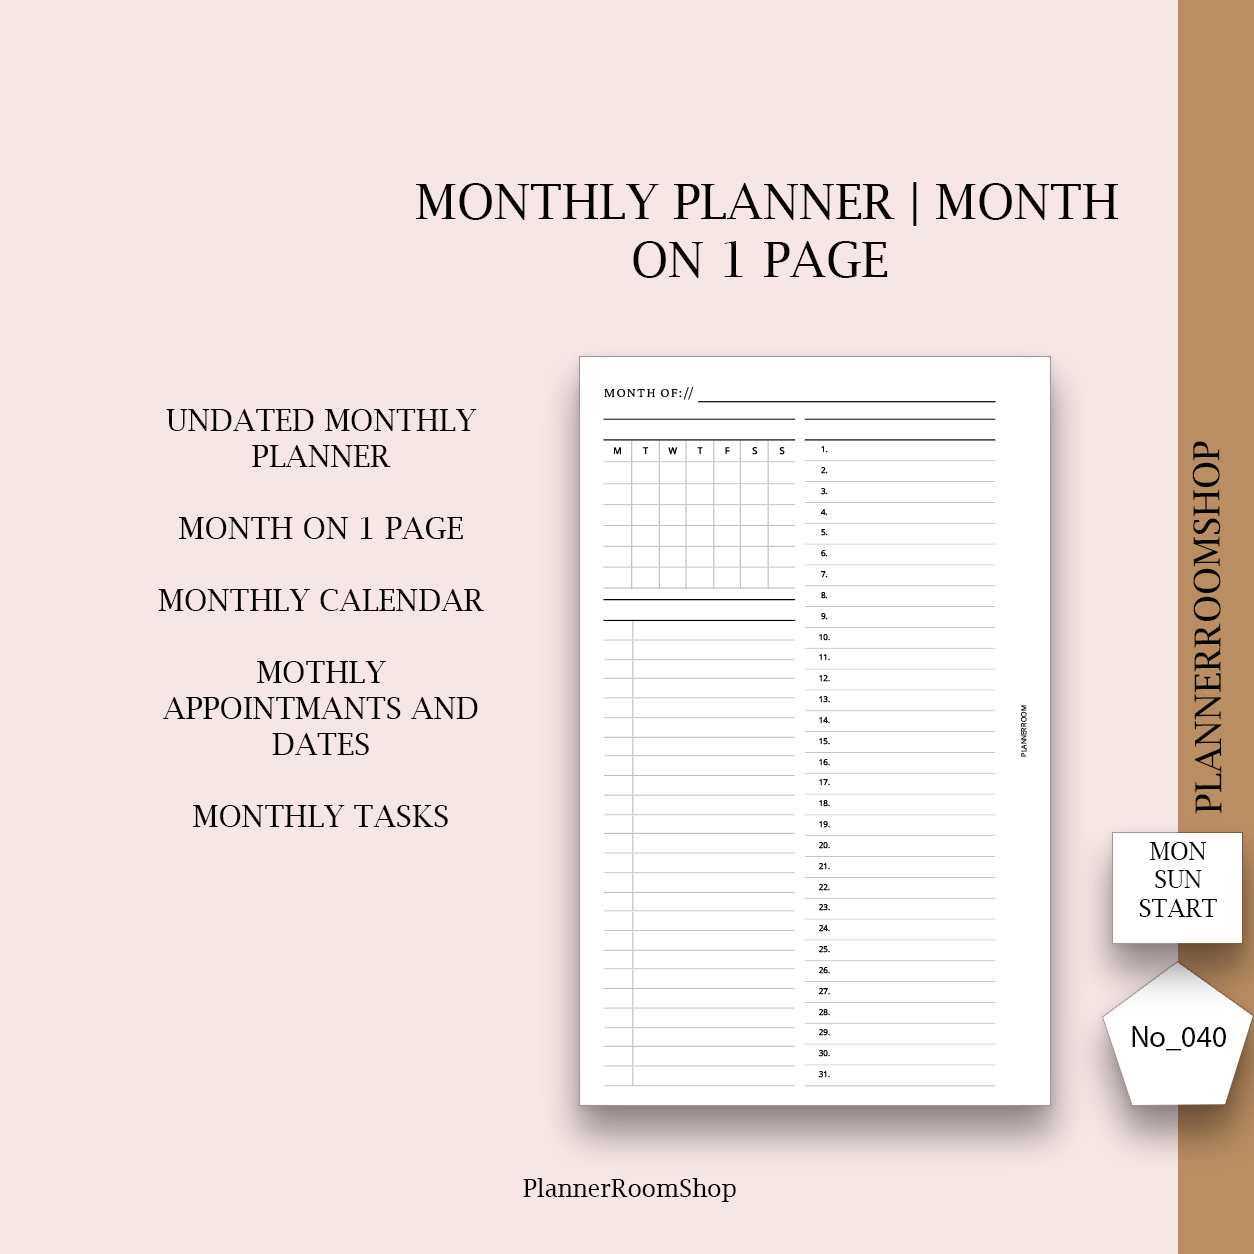 Monthly planner | Printable inserts - 040